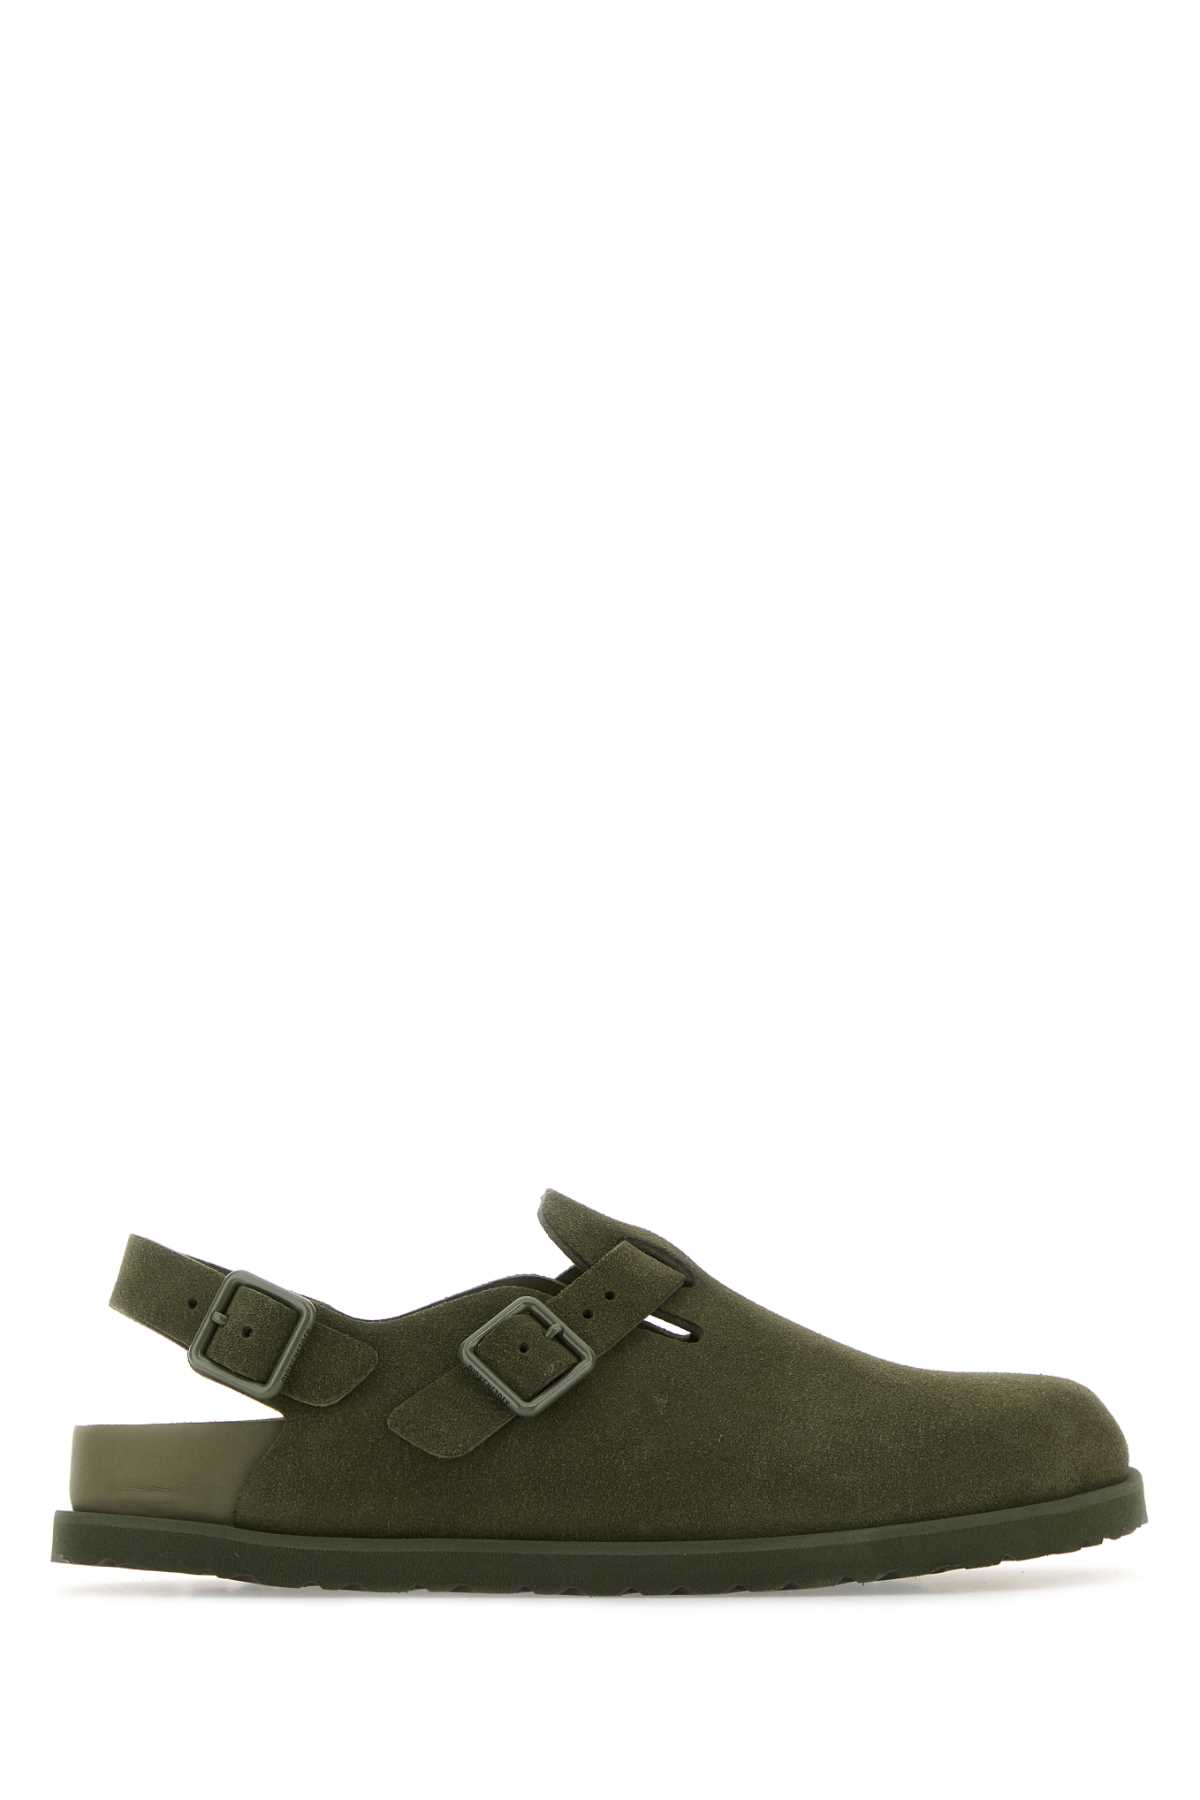 Army Green Suede Tokio Slippers